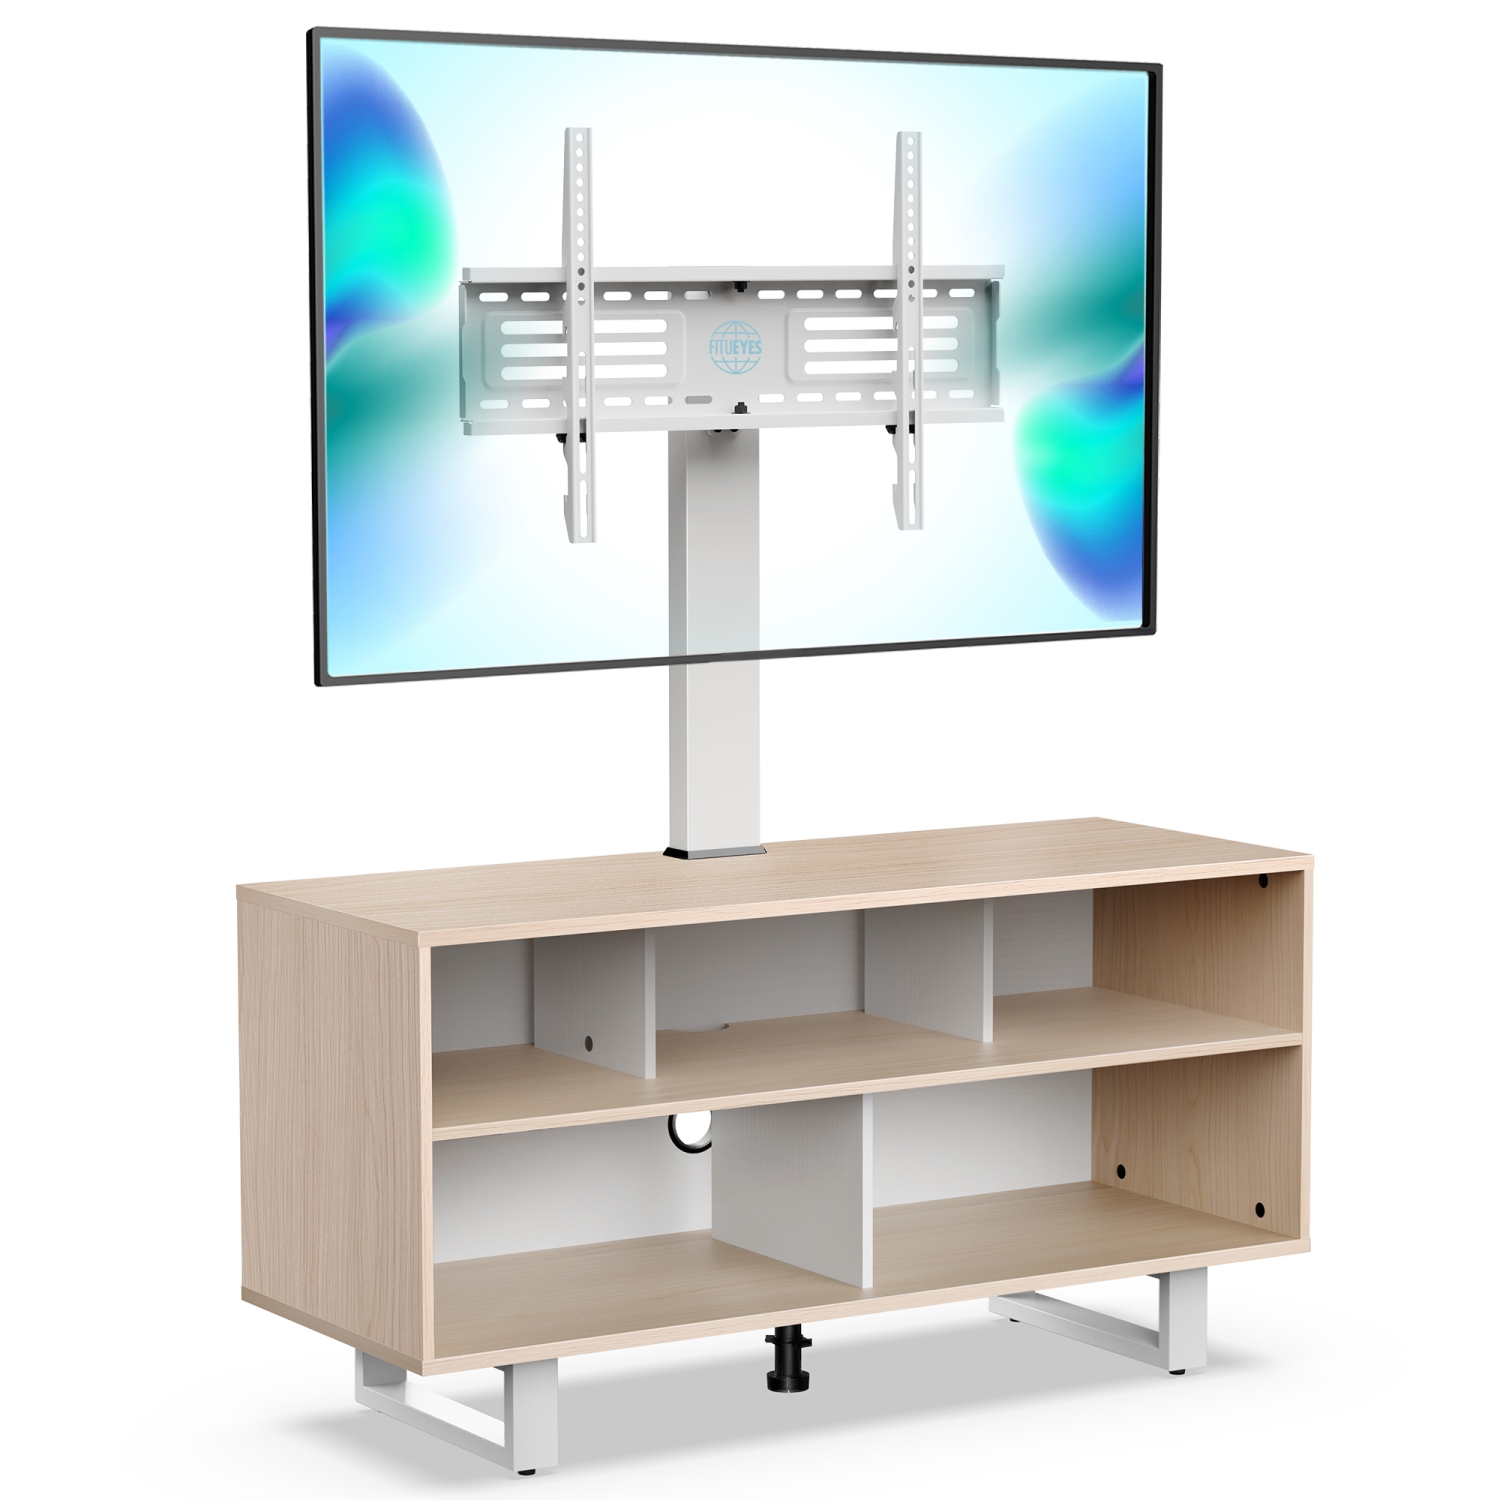 FITUEYES TV Stand Cabinet with Storage for 32 to 70 inches LED LCD Flat Screen, TV Table Stand with Swivel Mount & Height Adjustable Media Console White